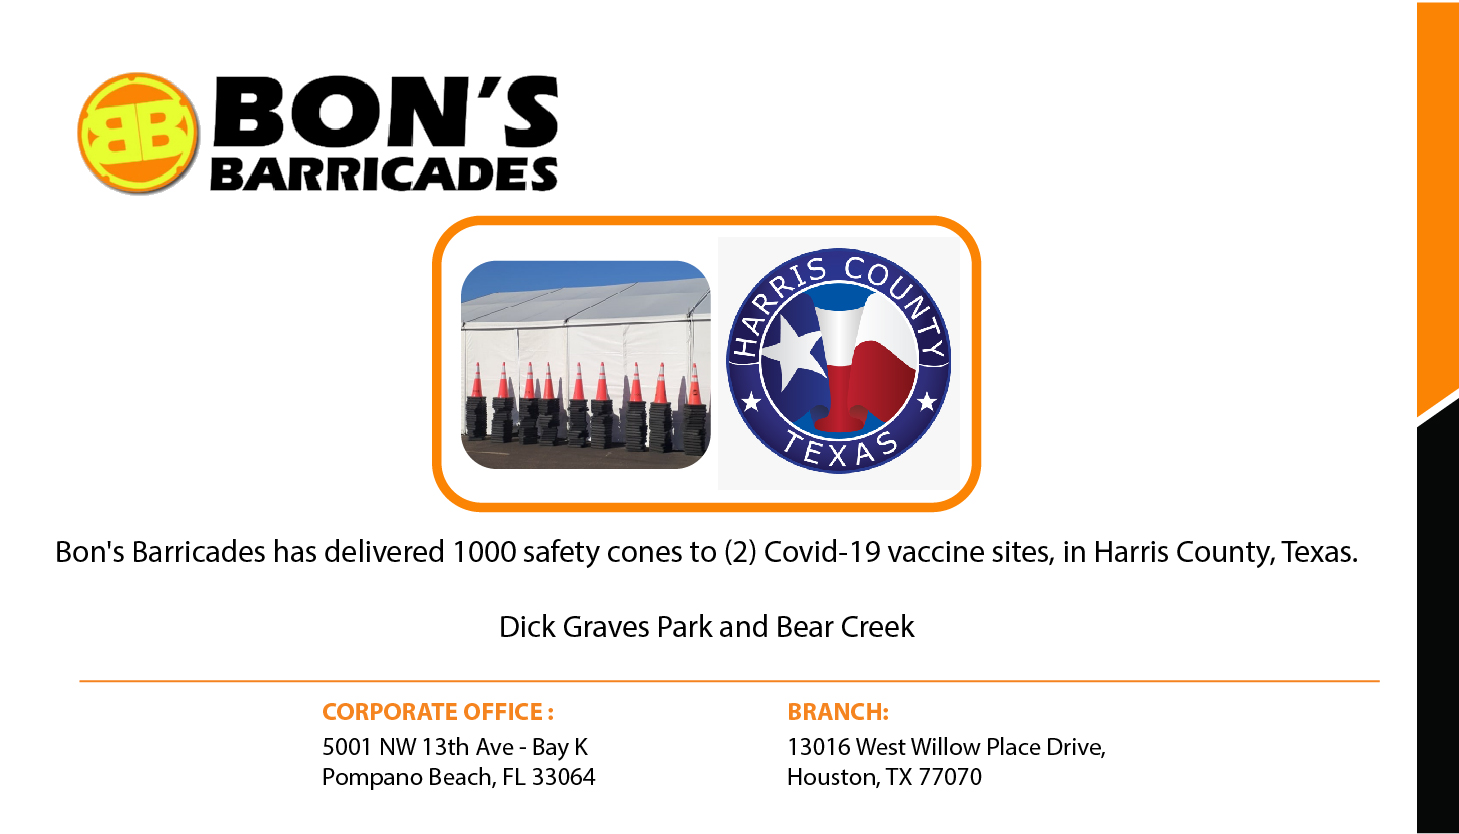 Post about how Bon’s Barricades delivered 1,000 safety cones to two COVID-19 vaccination sites in Harris County, Texas